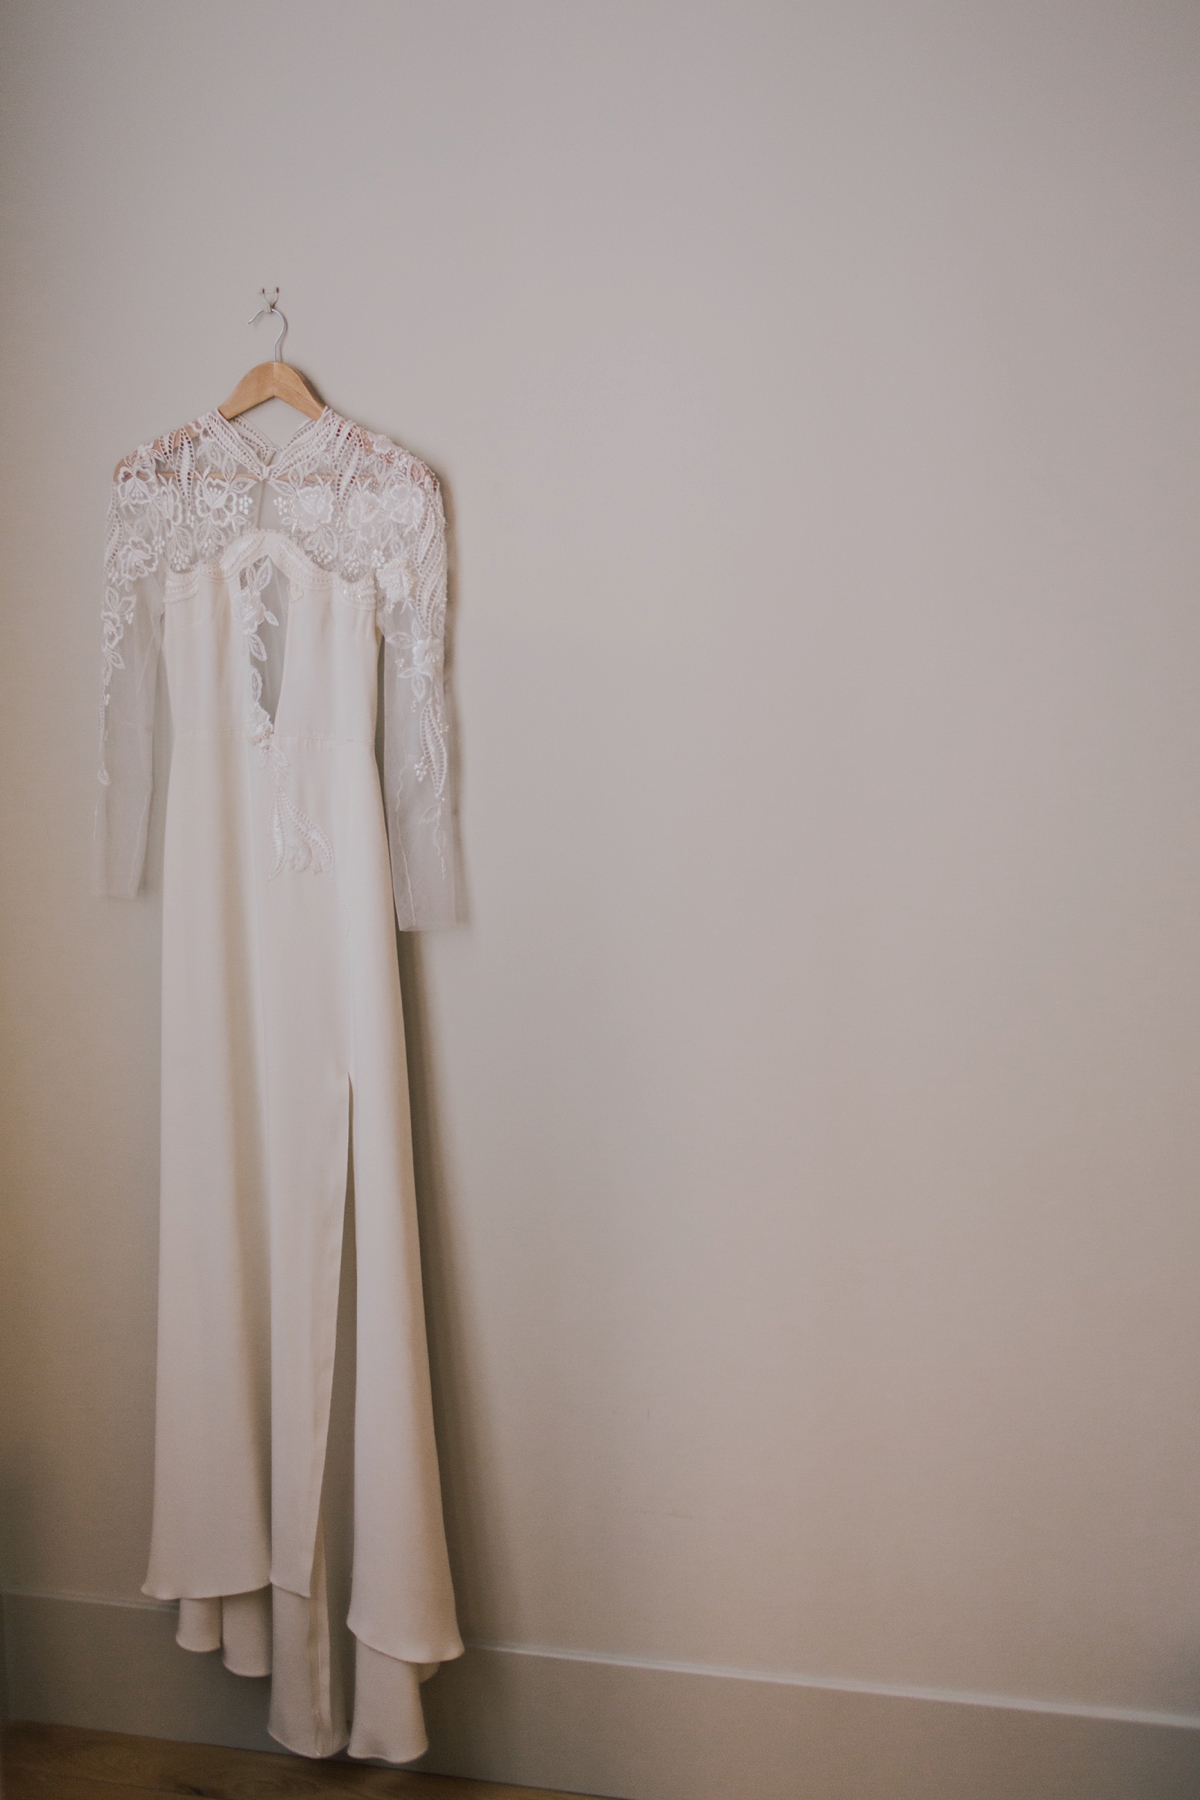 2 A customised 1970s dress for a modern non traditional London wedding. Images by Lisa Jane Photography